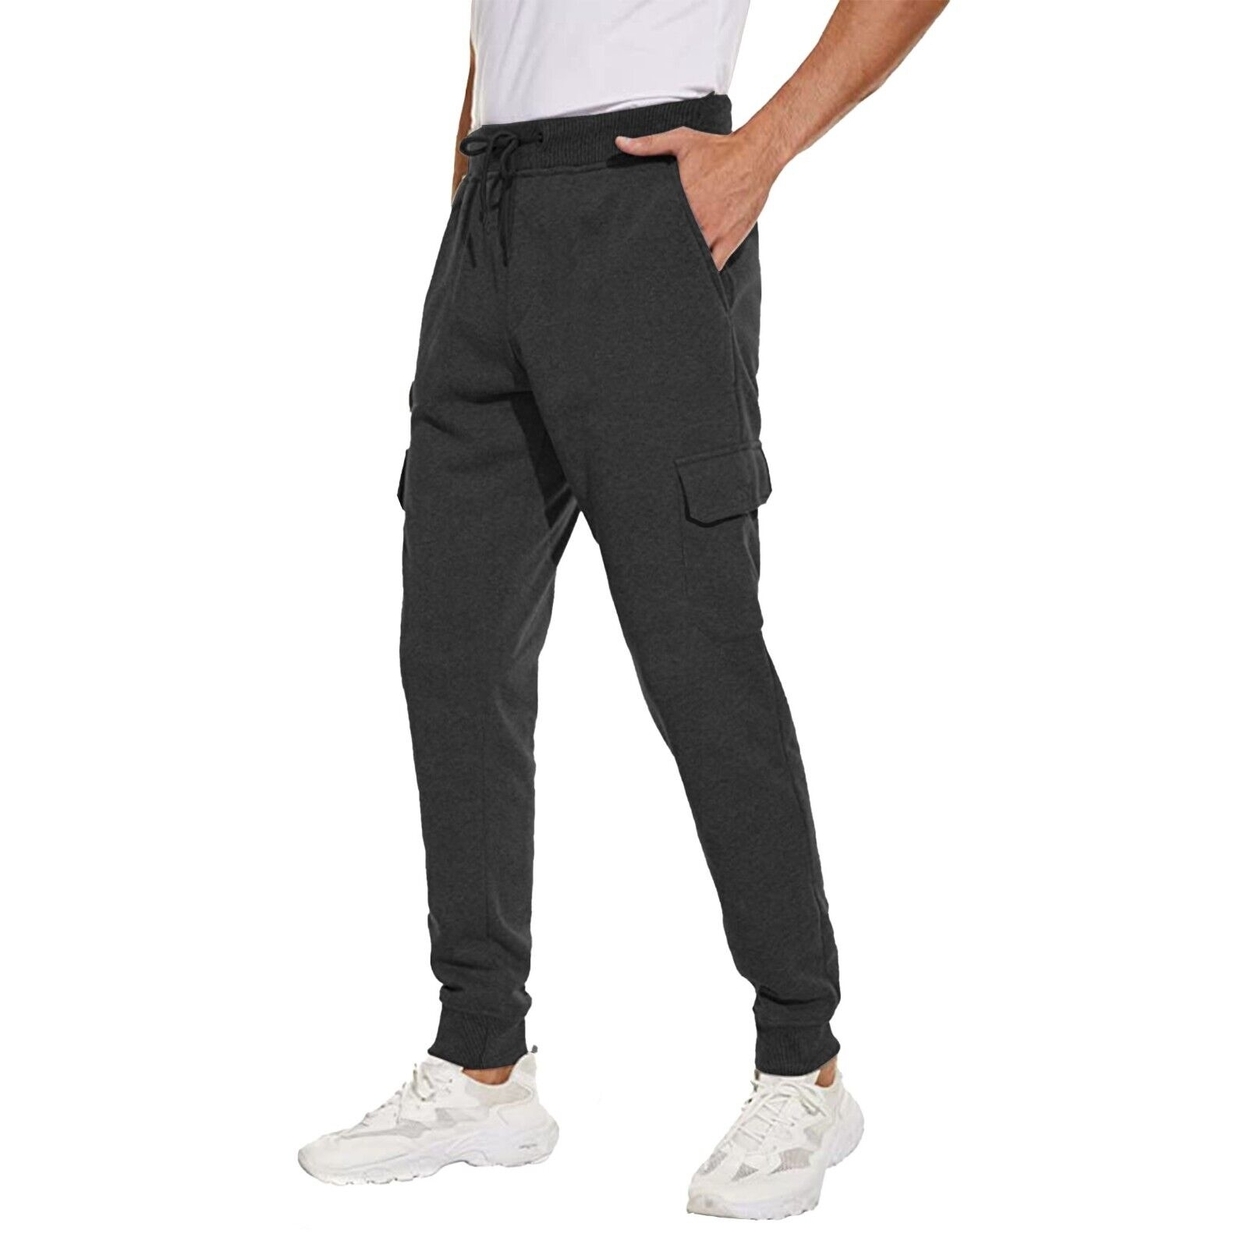 Men's Ultra Soft Winter Warm Thick Sweat Pant Athletic Sherpa Lined Jogger Pants - Black, Small